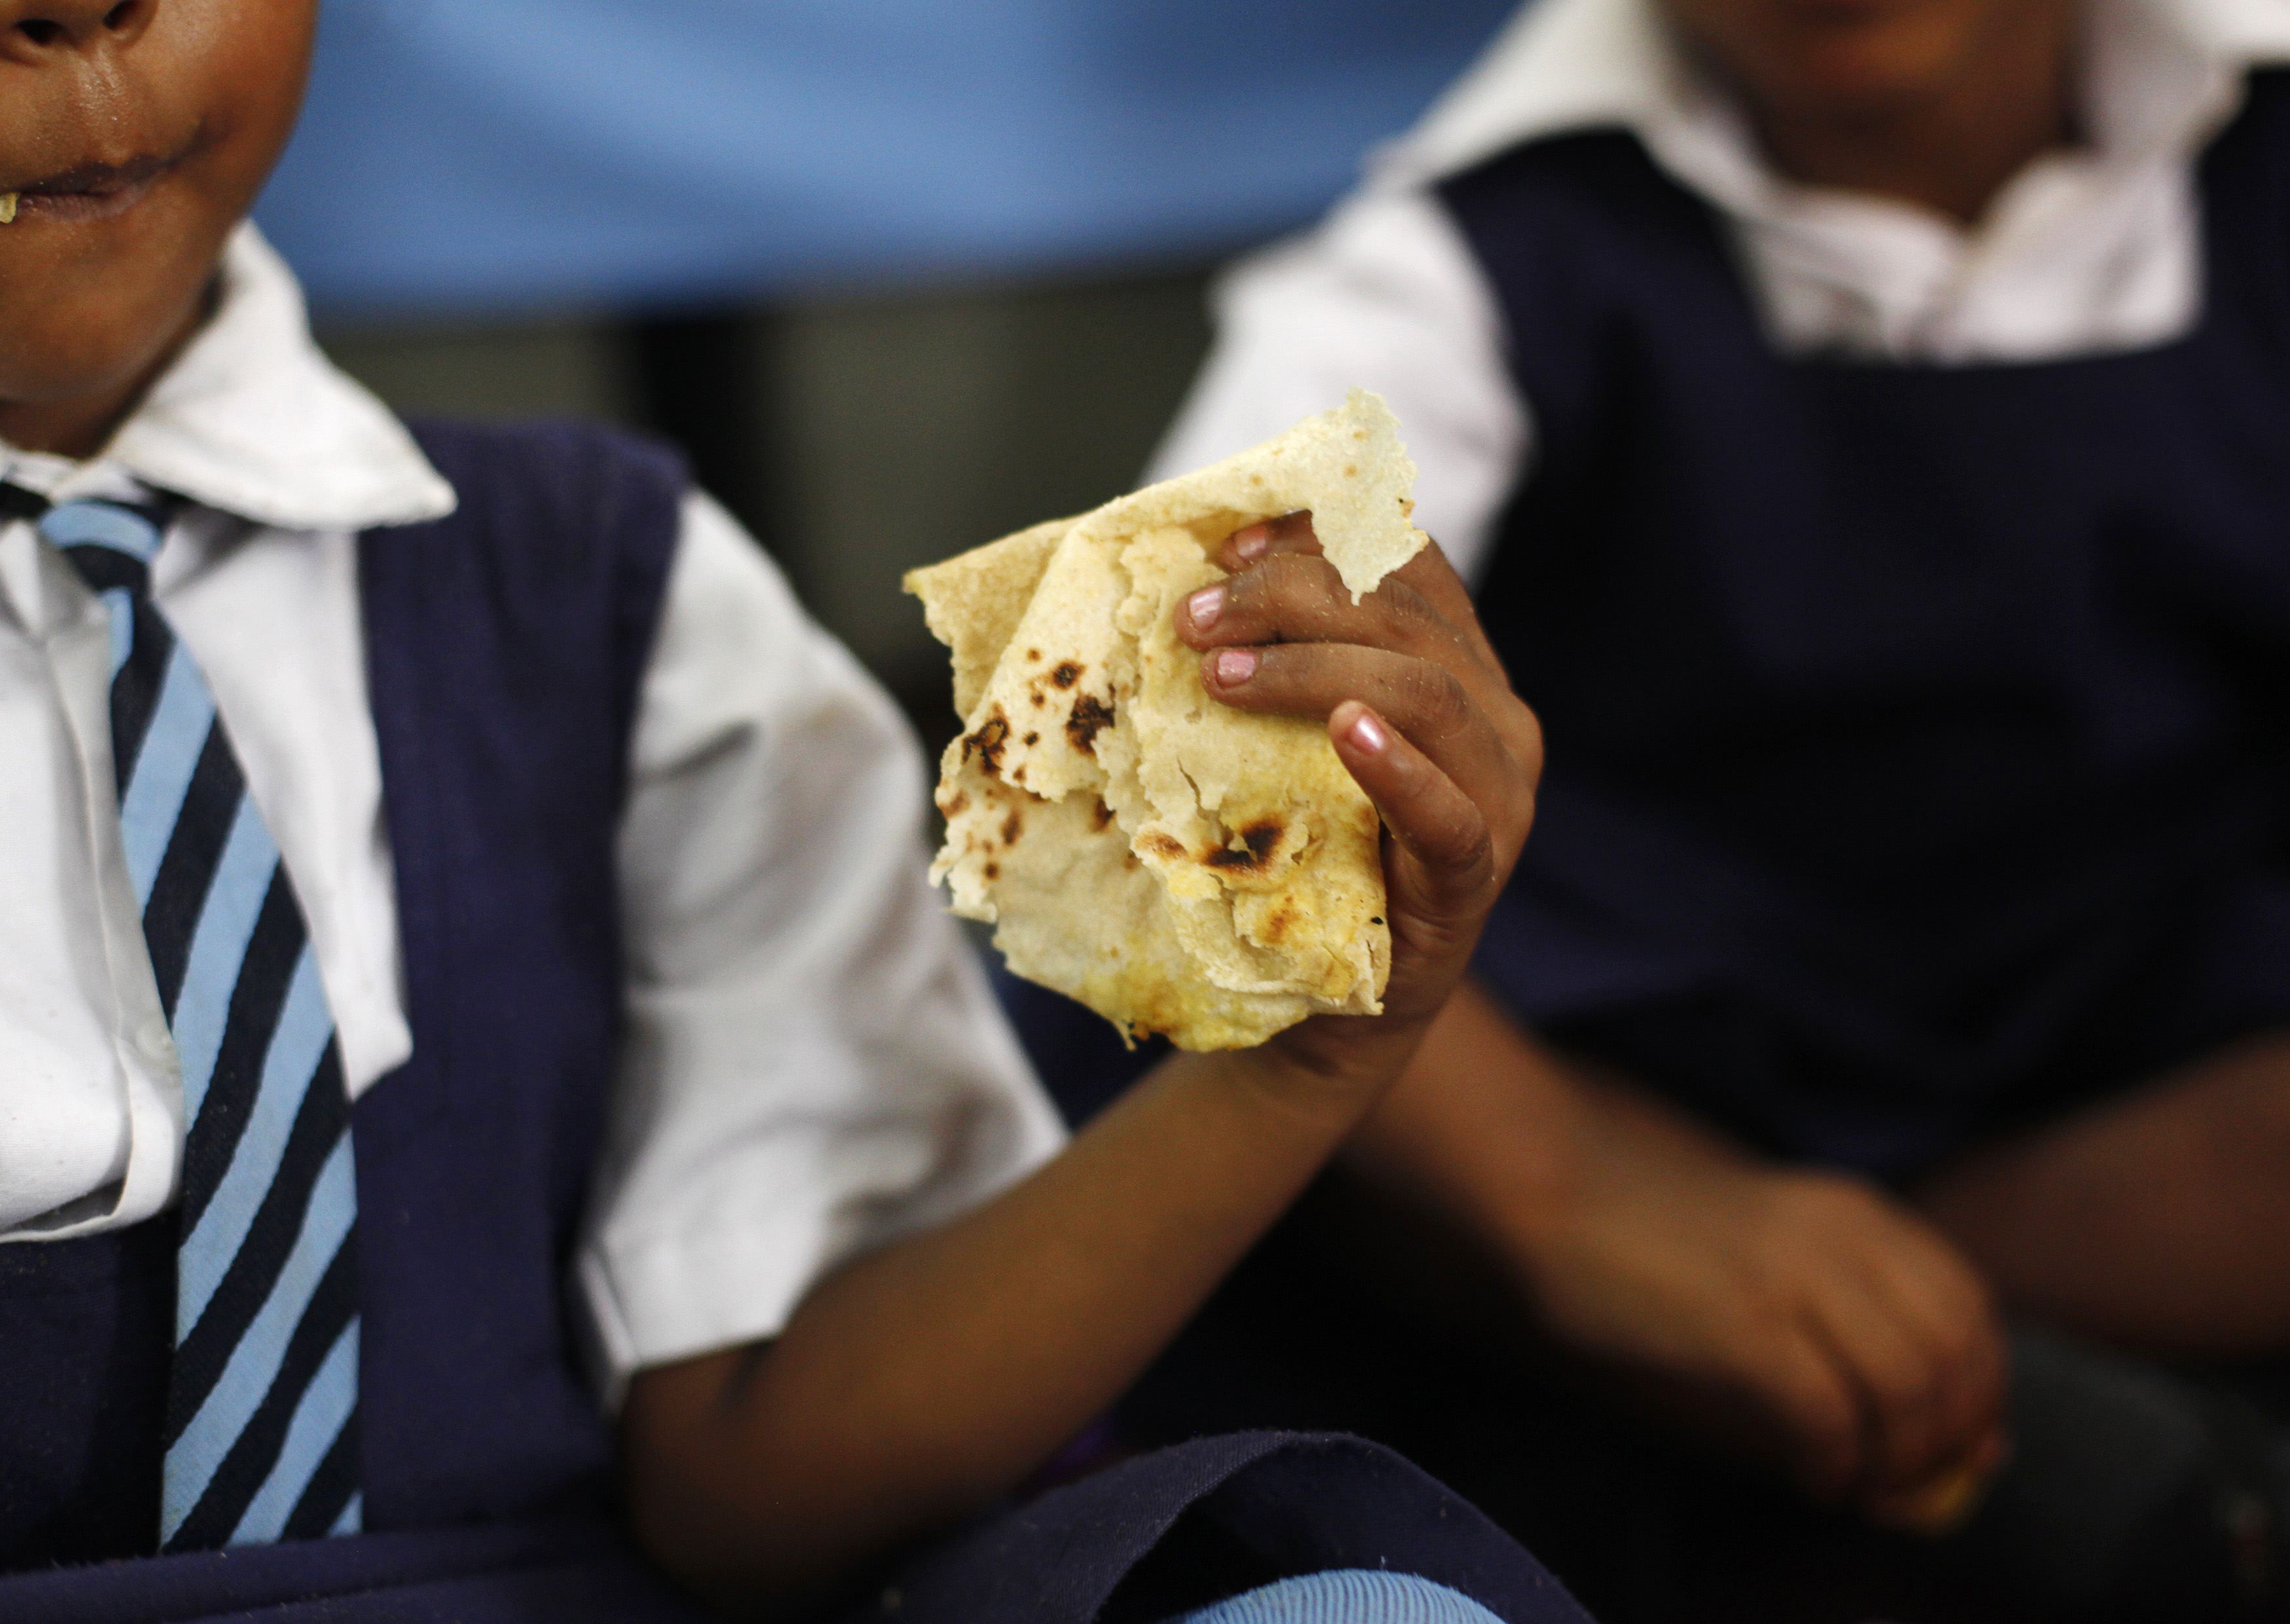 23 schoolchildren died from eating pesticide-contaminated lunches at school. Photo: Reuters